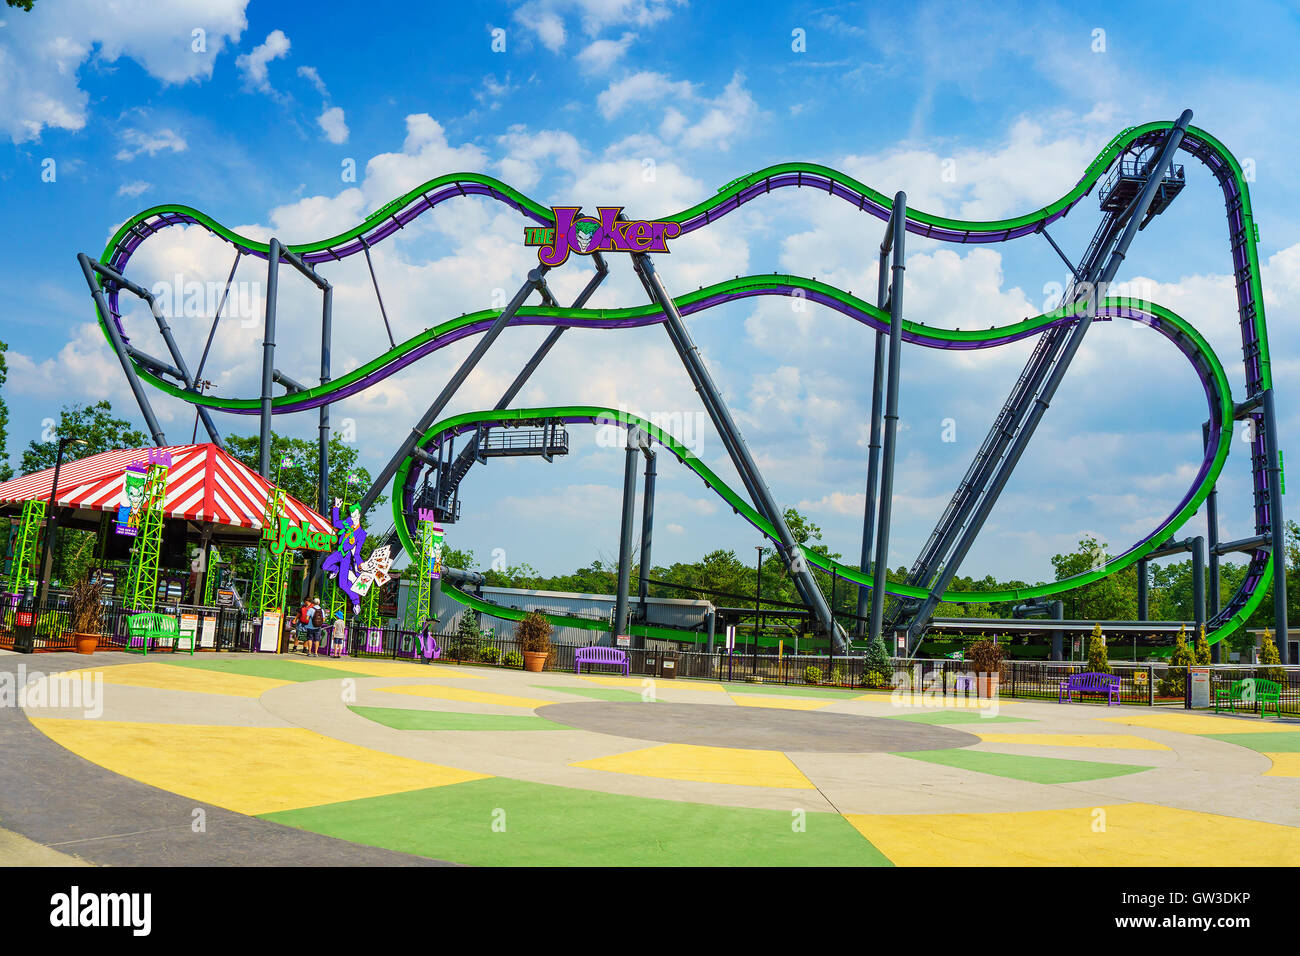 The beautiful Six Flags Great Adventure amusement park. New Jersey - United  States of America Stock Photo - Alamy